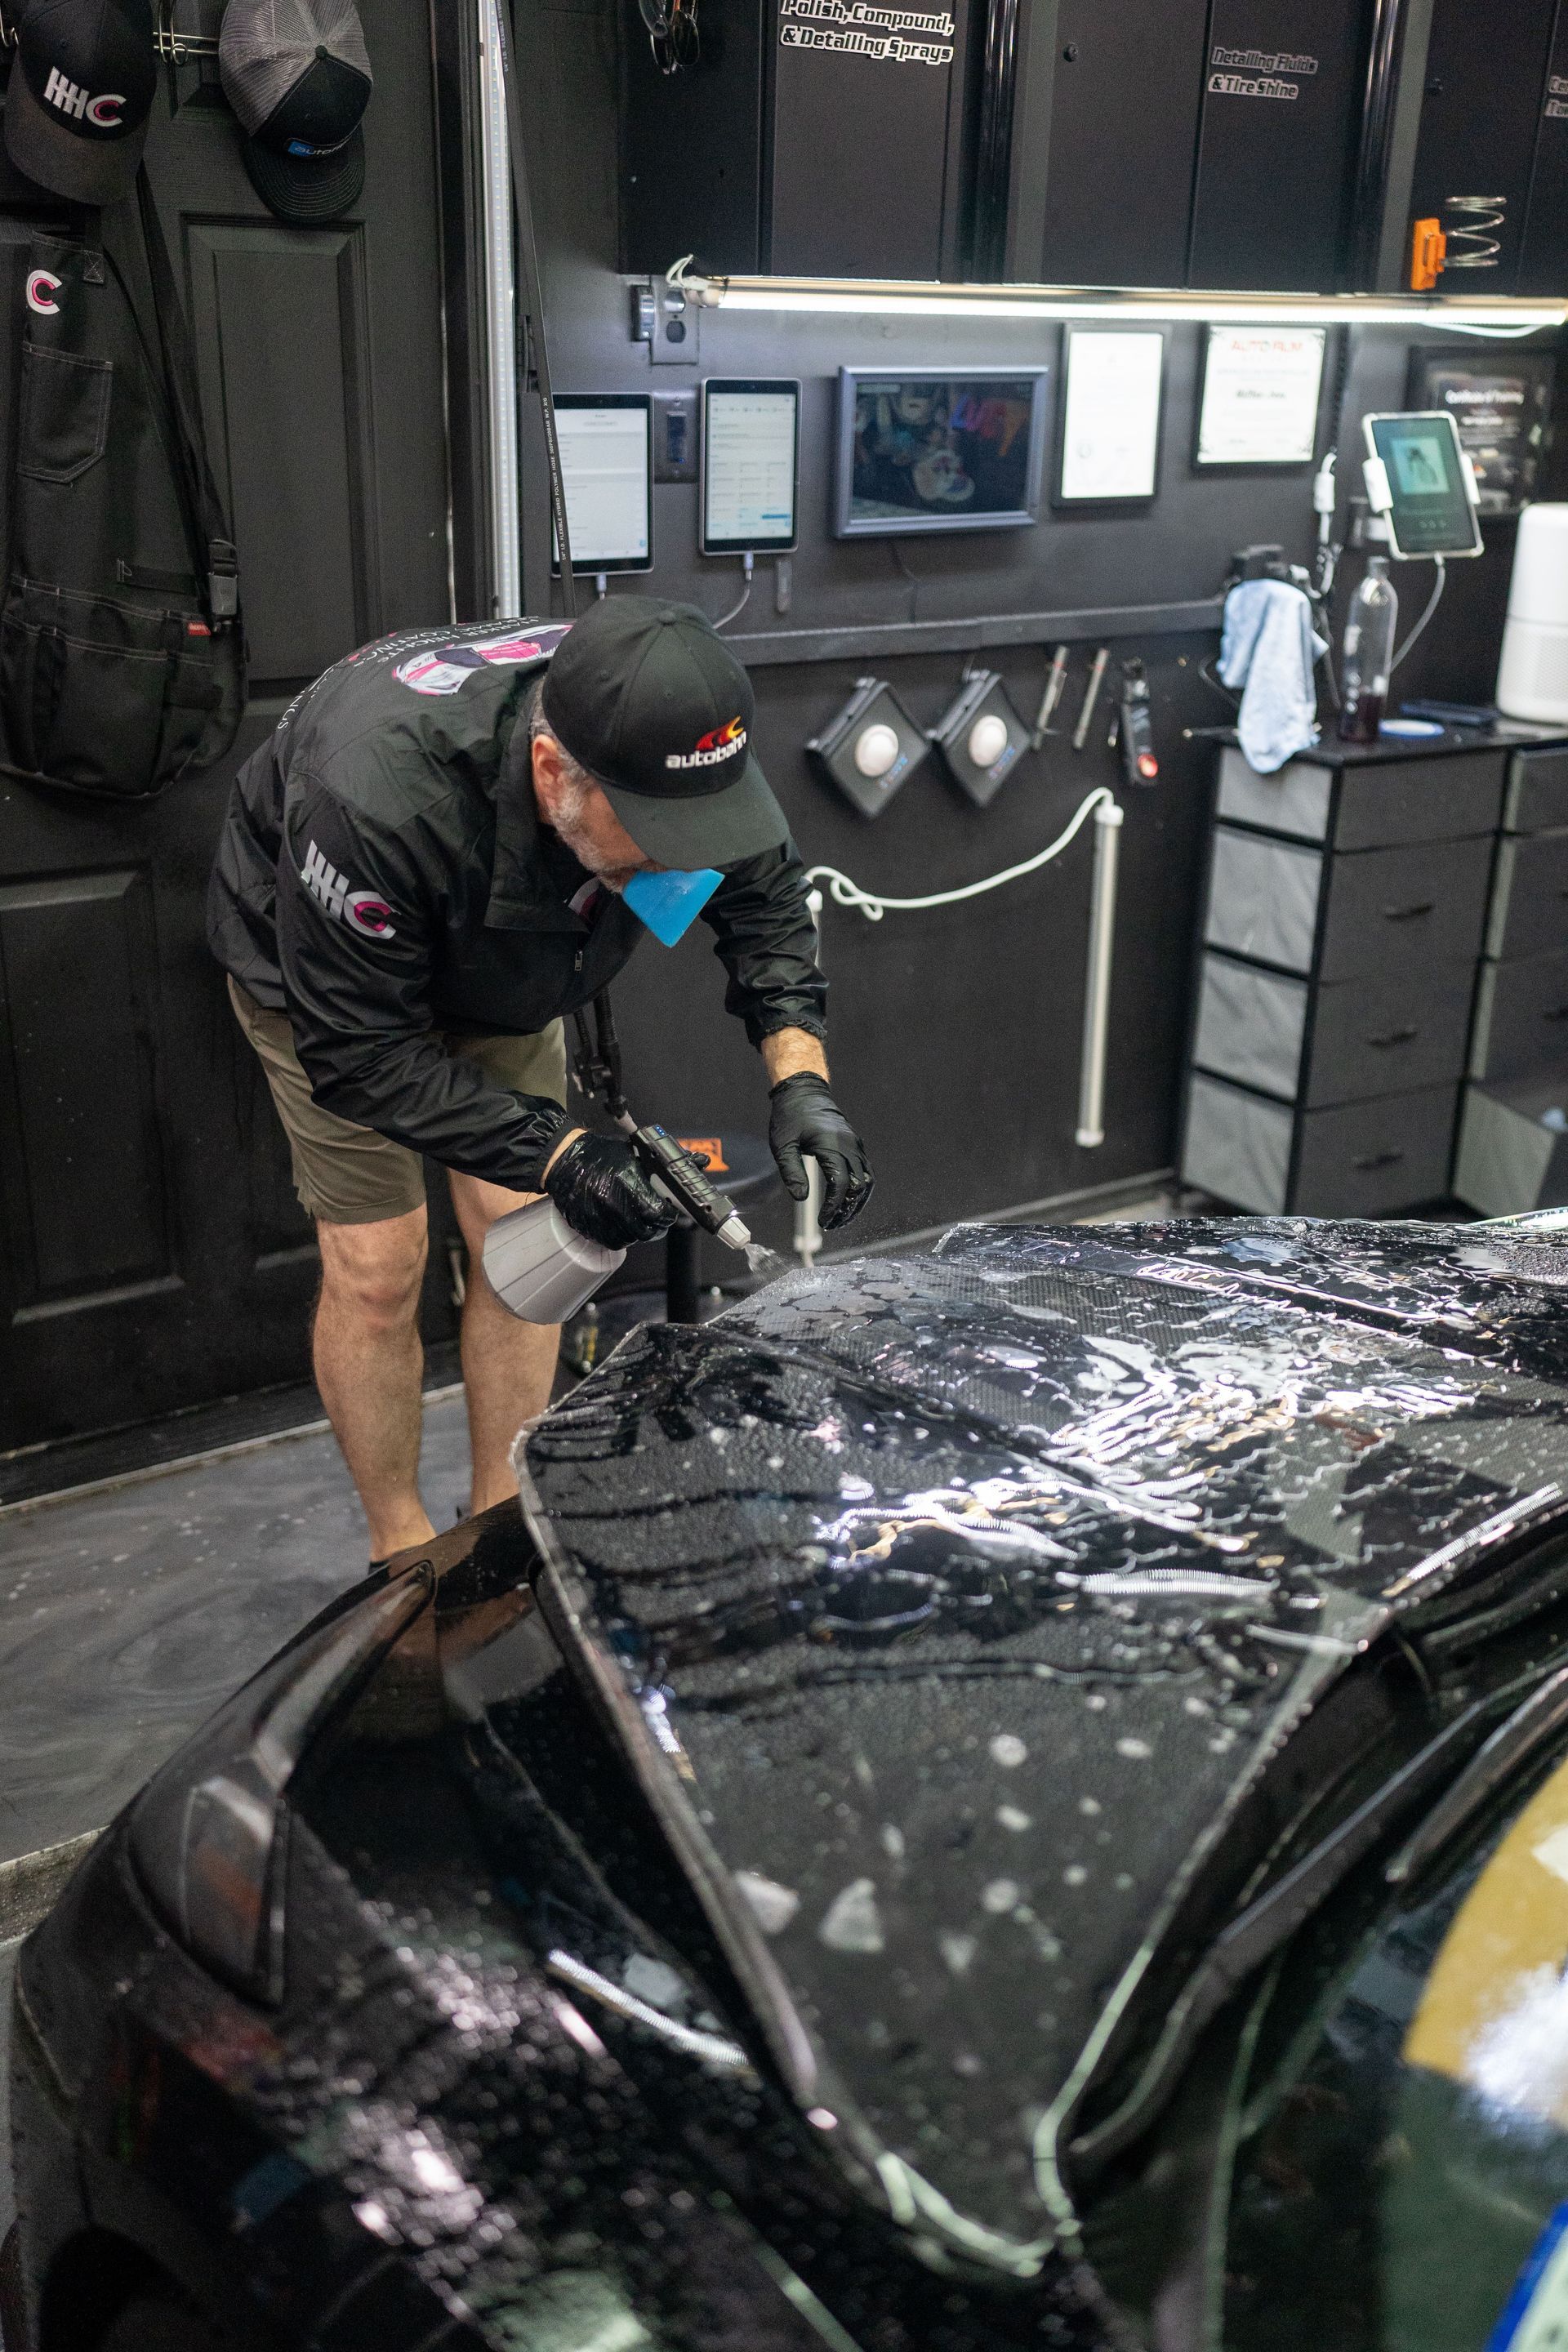 A man is cleaning the hood of a black car in a garage.